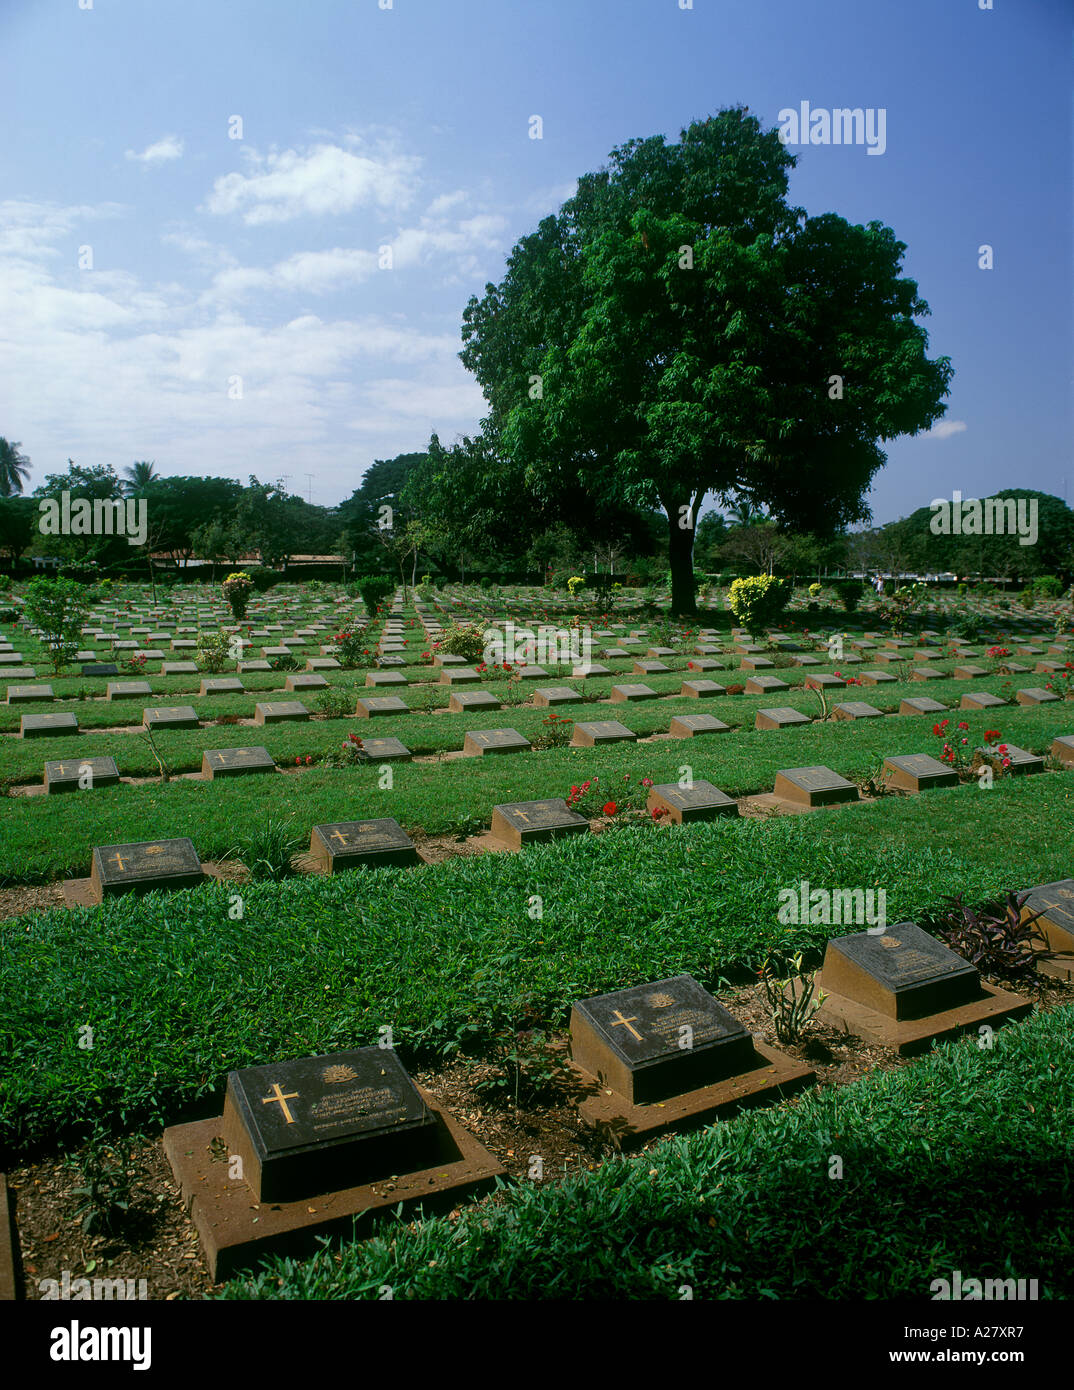 Allied soldiers WW2 graveyard at Kanchaniburi Thailand location of the Bridge on the River Kwai Stock Photo